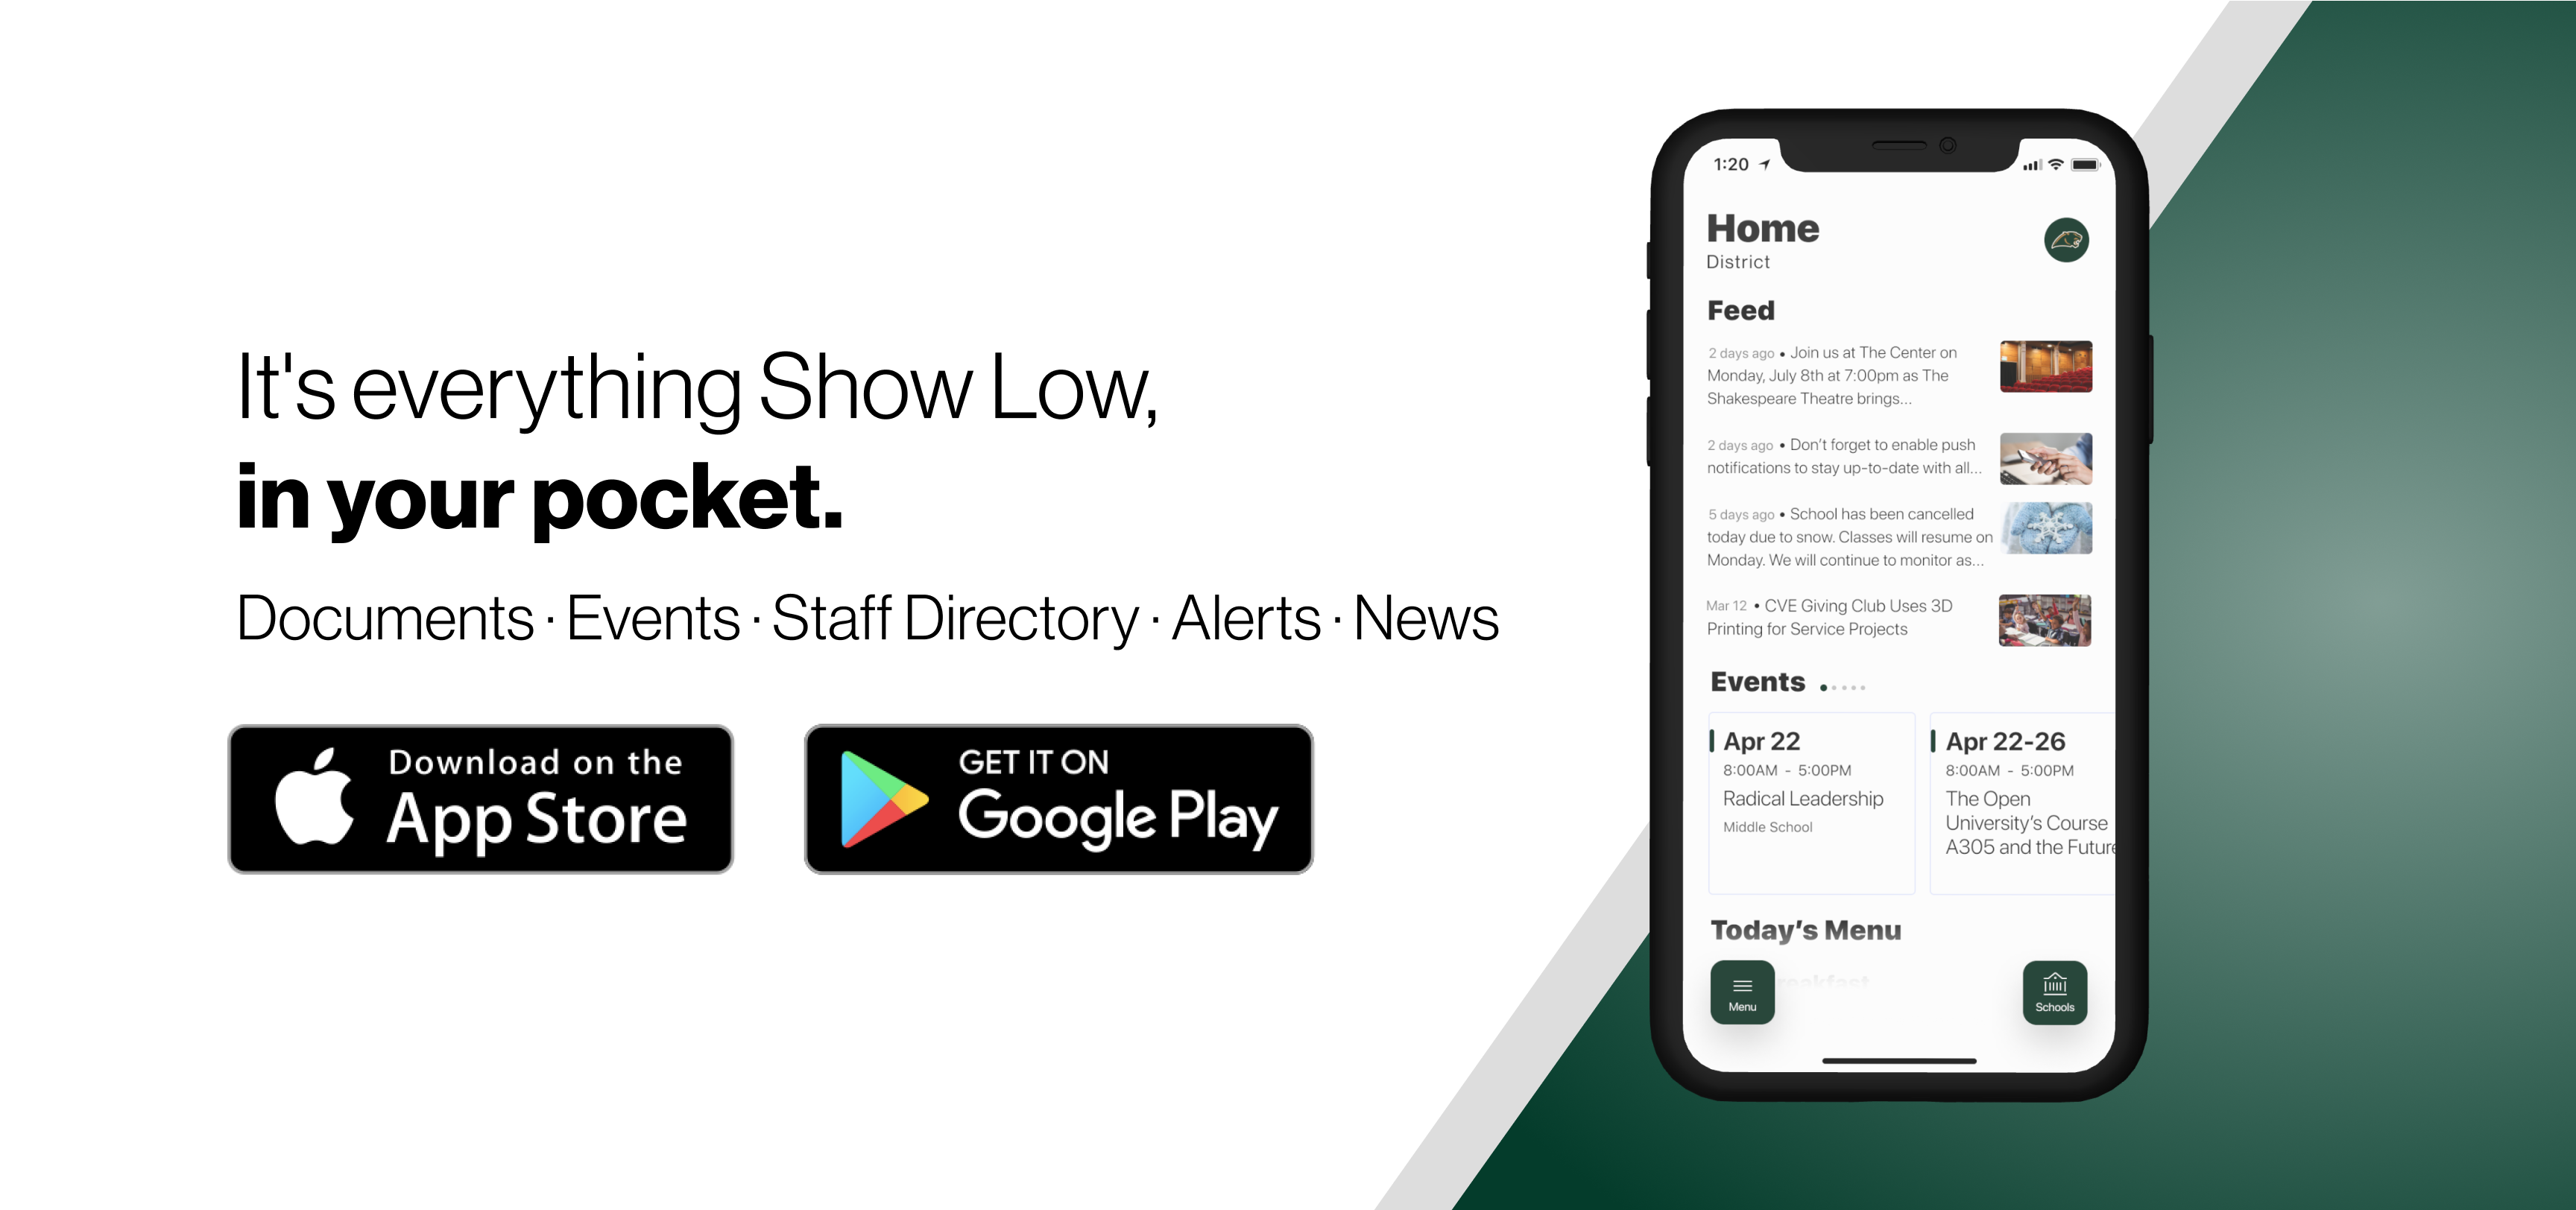 It's everything Show Low in your pocket. Download the mobile app today! 